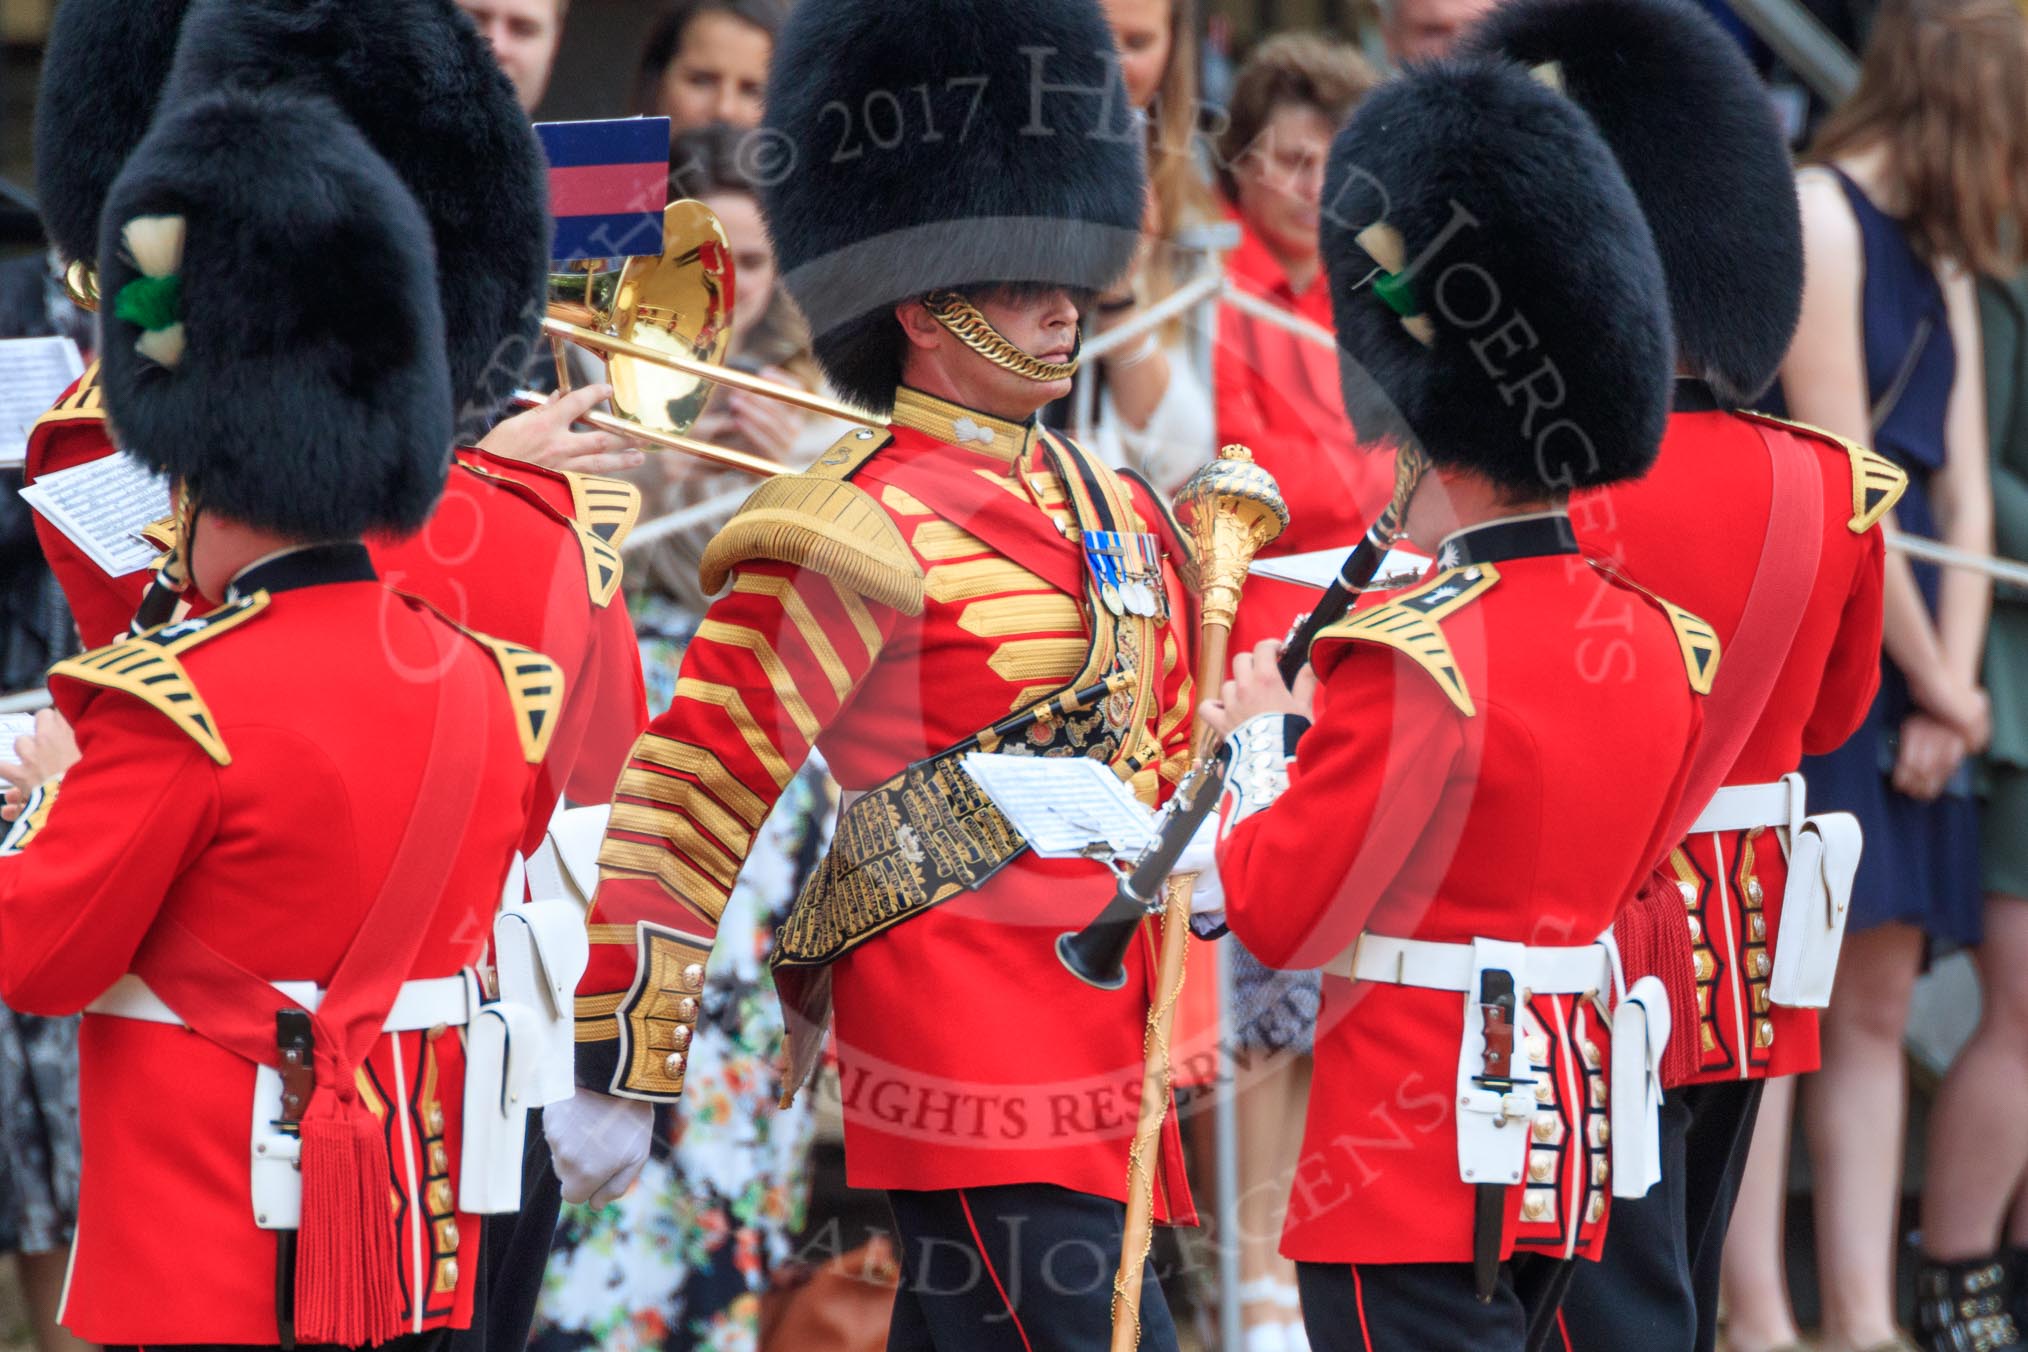 Senior Drum Major Damian Thomas, leading the 180 degrees turn of the Band of the Welsh Guards to get into position on Horse Guards Parade, during The Colonel's Review 2018 (final rehearsal for Trooping the Colour, The Queen's Birthday Parade)  at Horse Guards Parade, Westminster, London, 2 June 2018, 10:15.